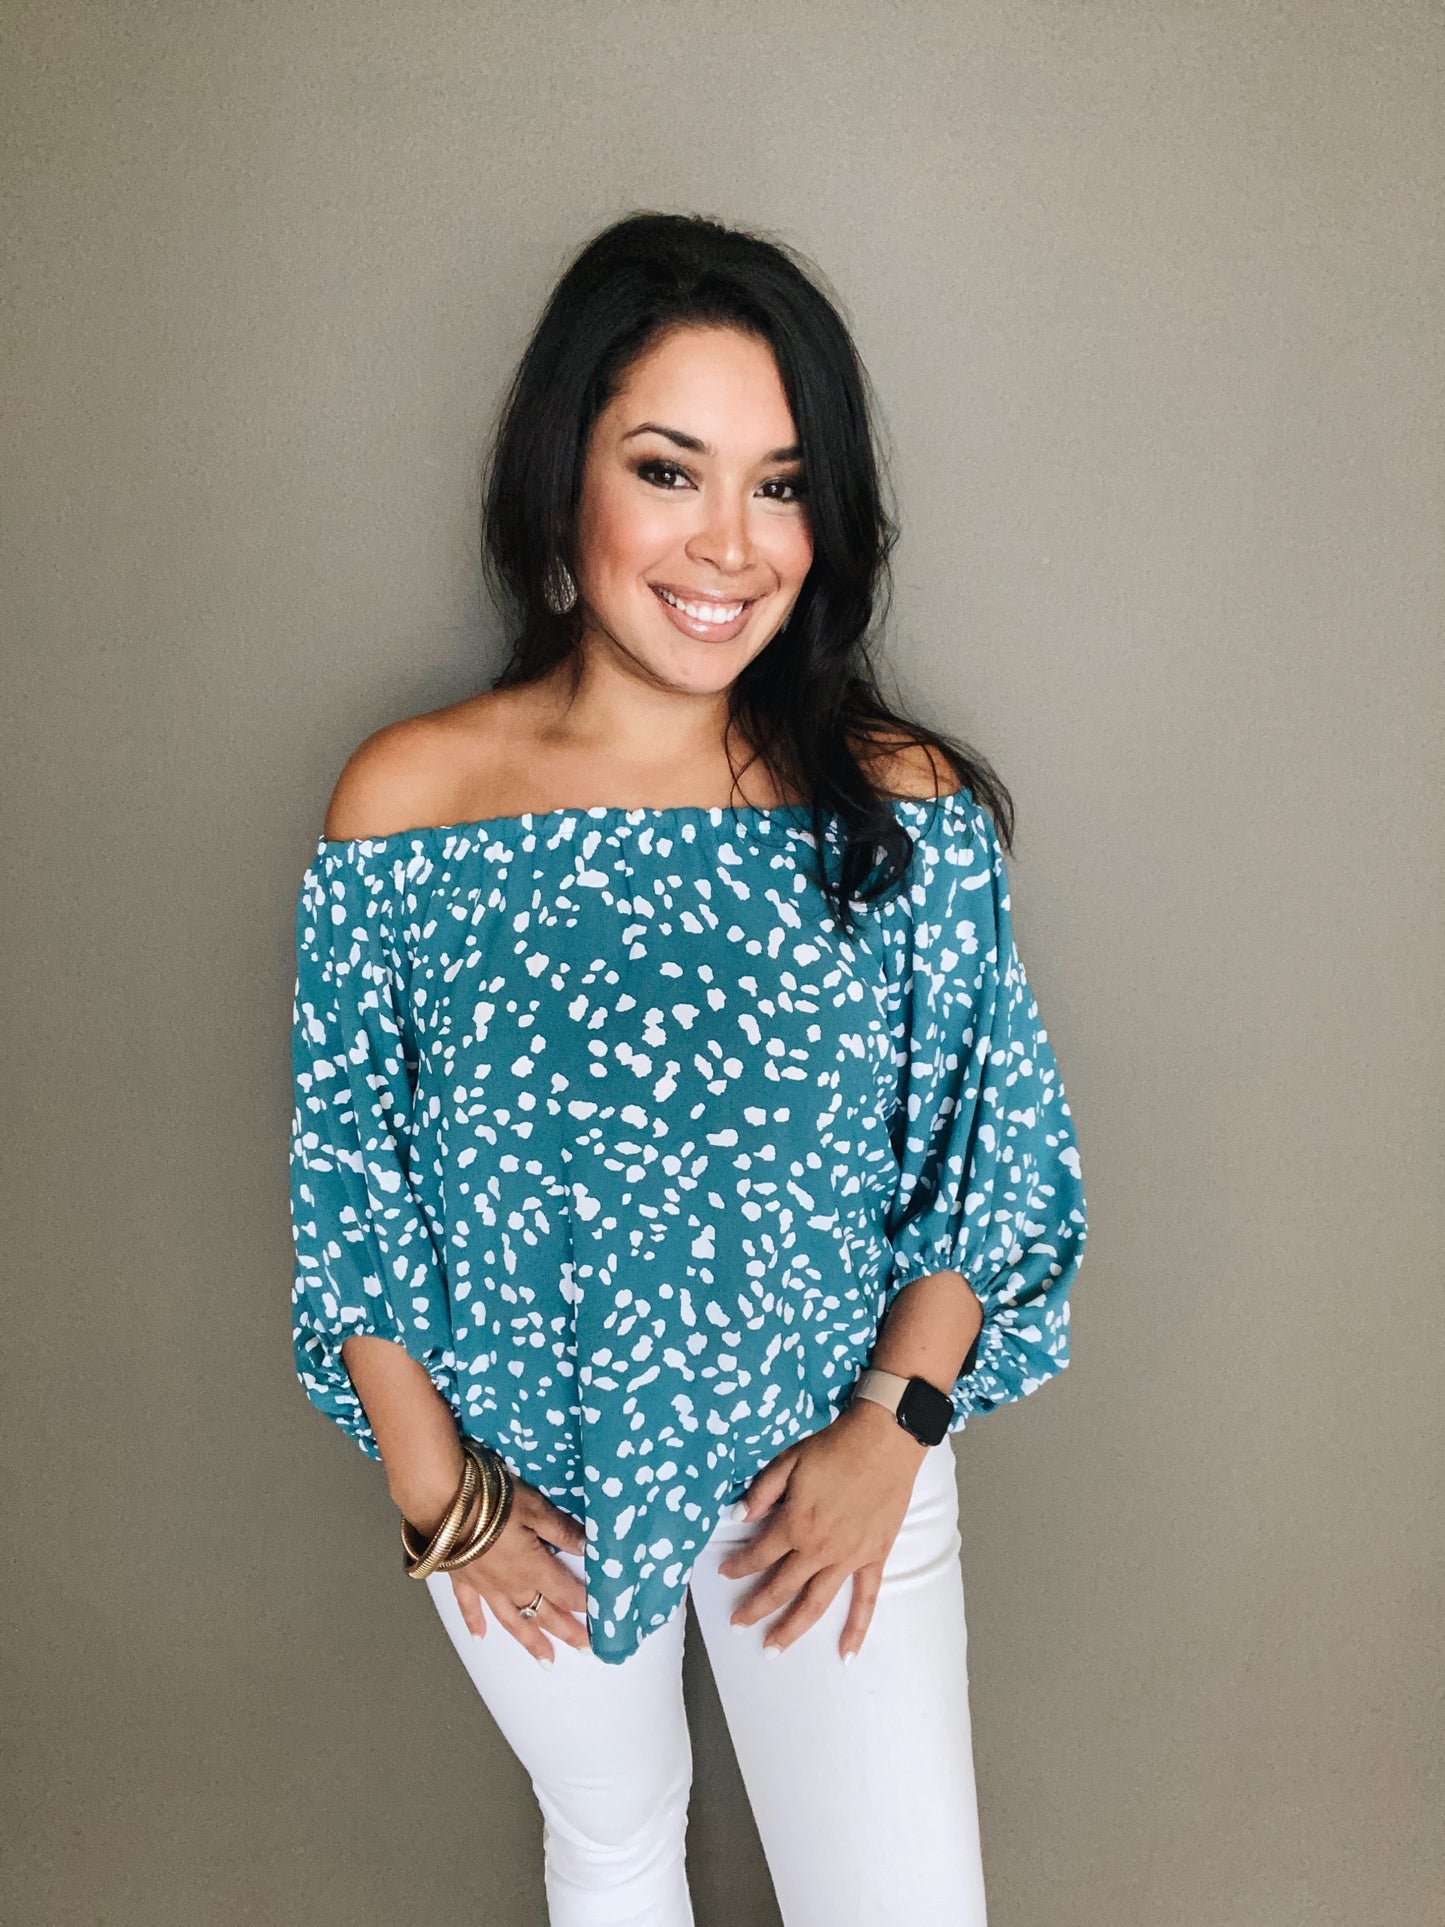 Teal Spotted Off the Shoulder Top - Salud HTX